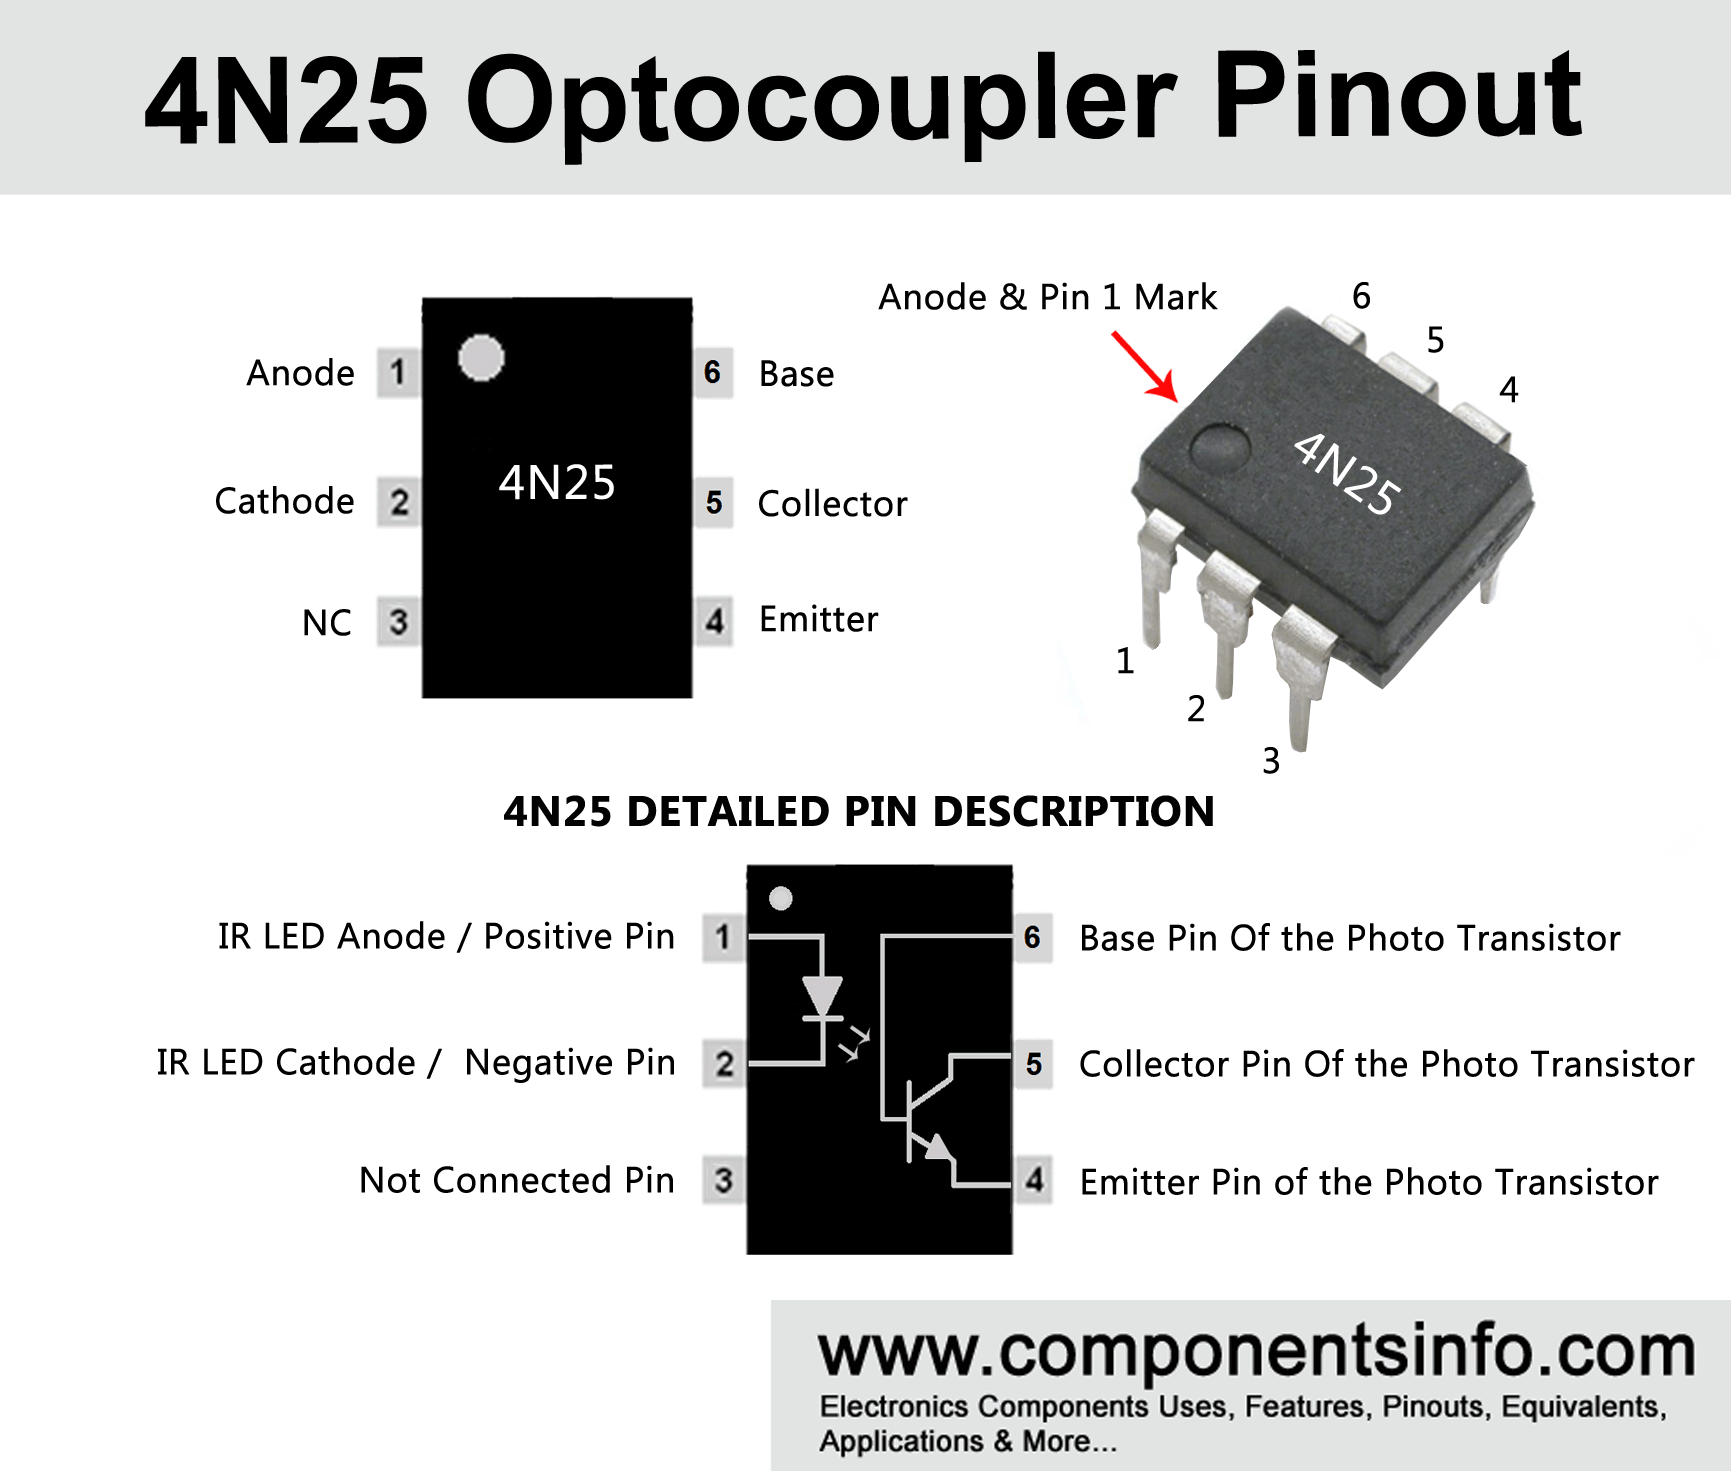 4N25 Optocoupler Pinout, Datasheet, Equivalent, Features and Other Information